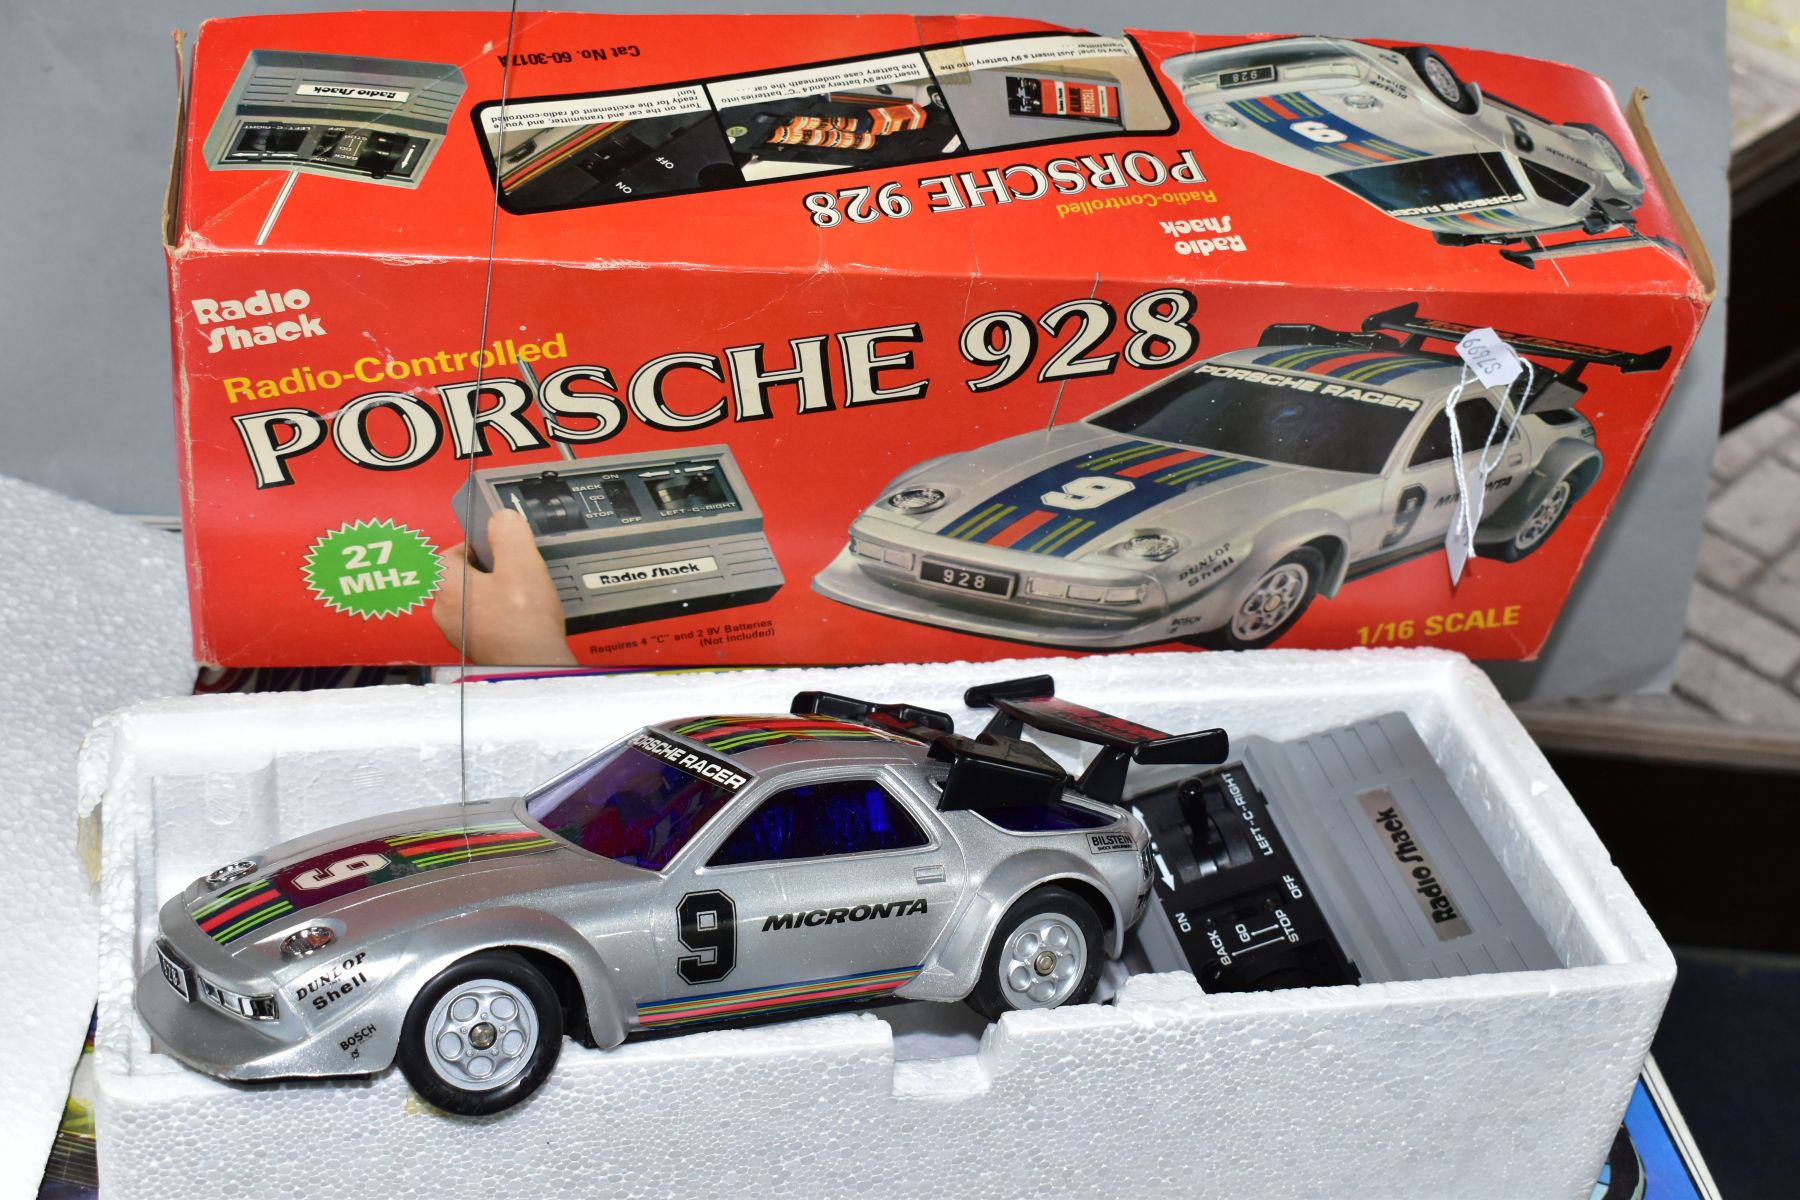 A BOXED MATCHBOX POWERTRACK PLUS ELECTRIC RACING SET, No PP-2000, contents not checked but appears - Image 3 of 6